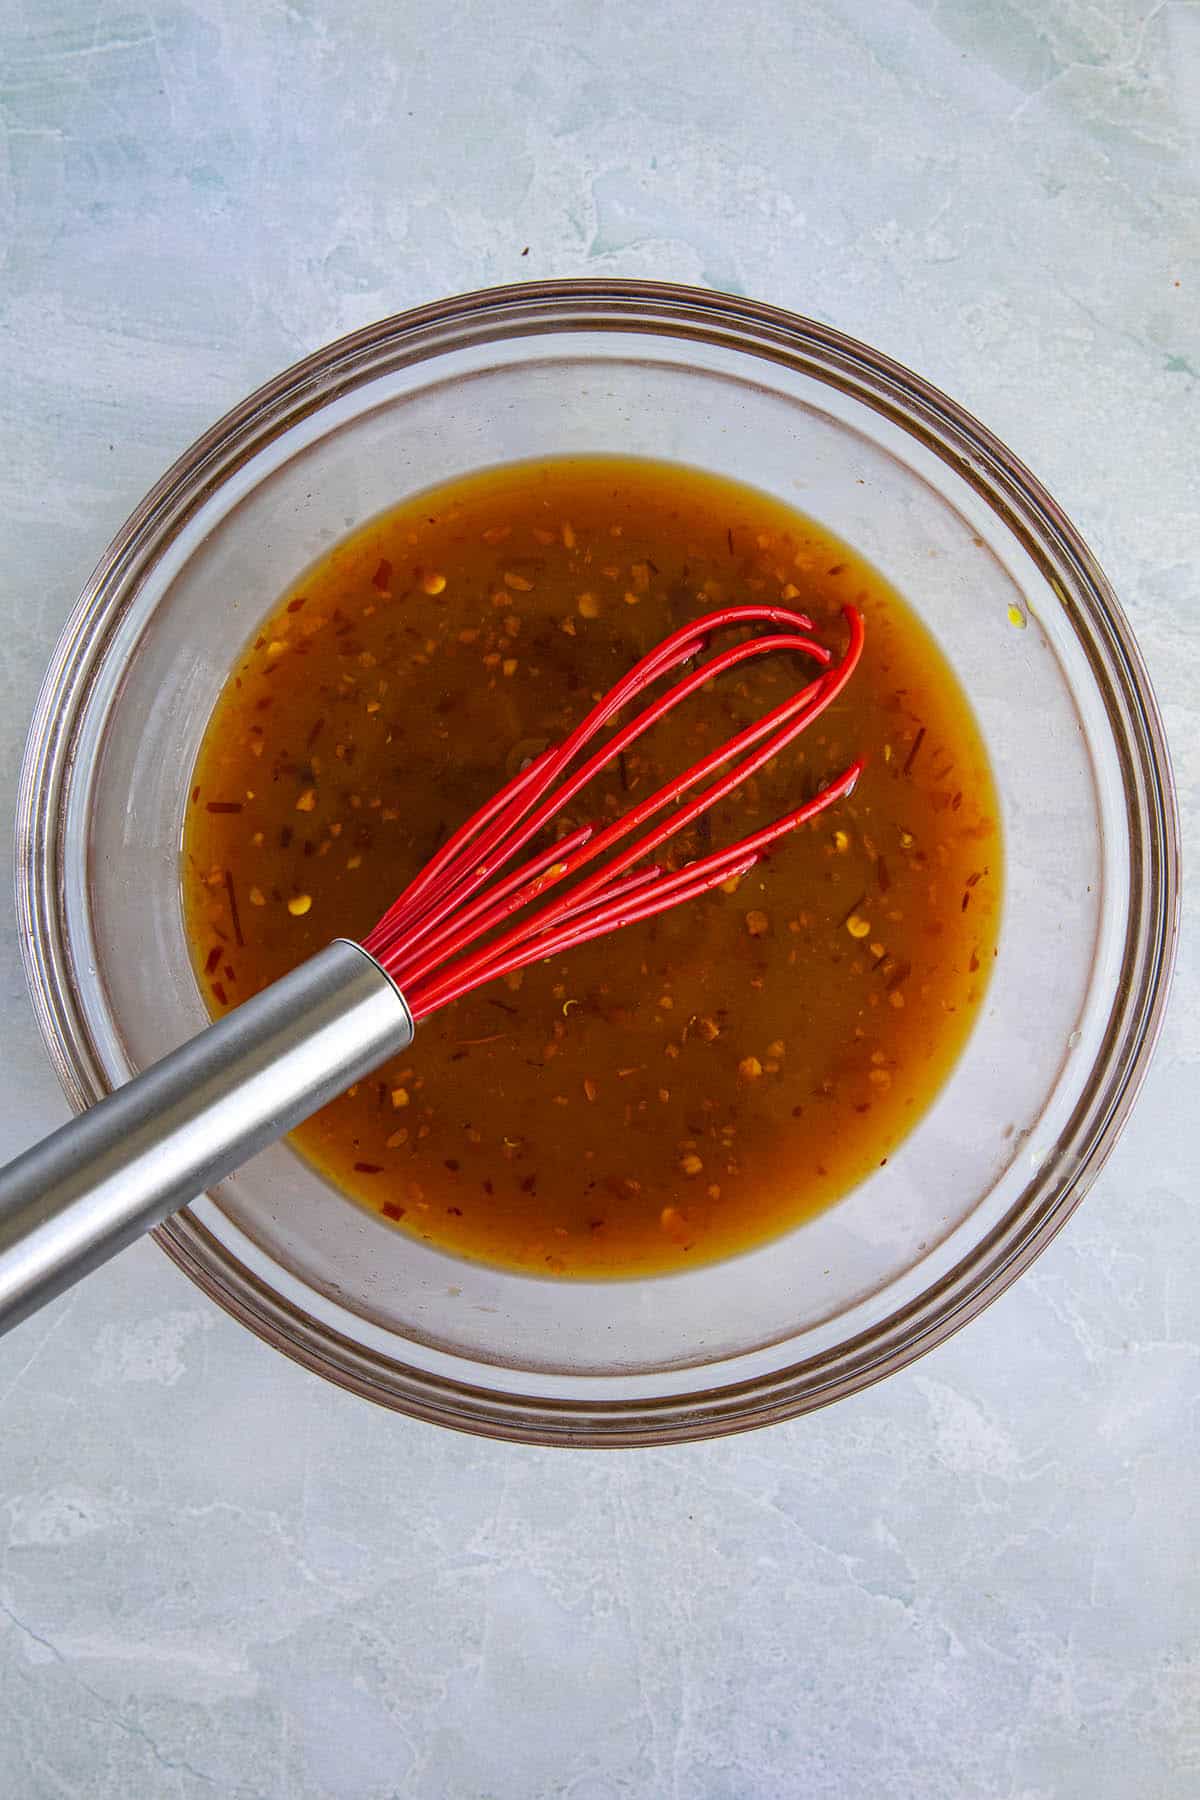 Whisking General Tso Sauce ingredients together in a bowl